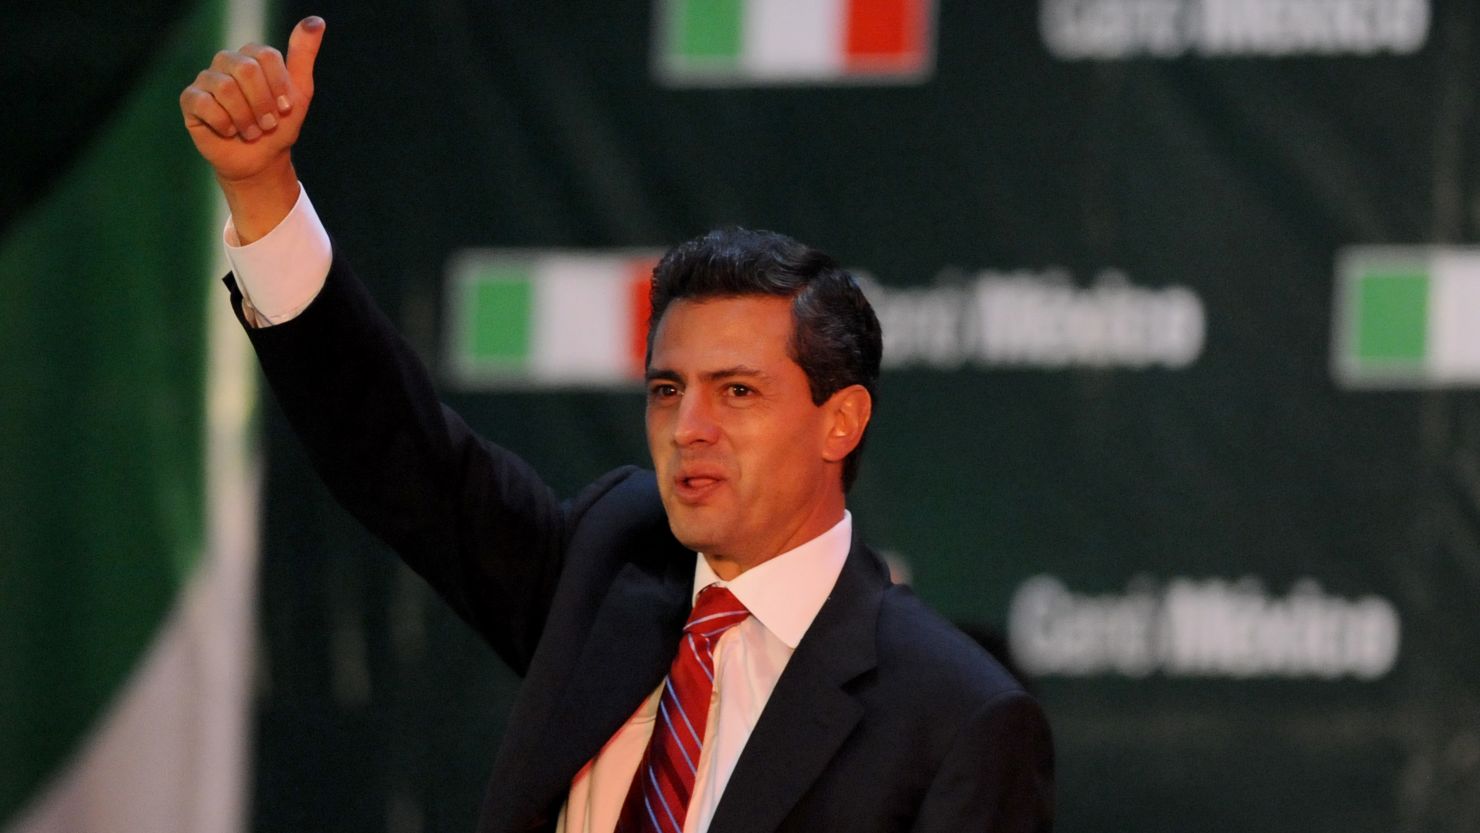 Mexico's incoming president Enrique Pena Nieto will meet with President Obama on Tuesday.